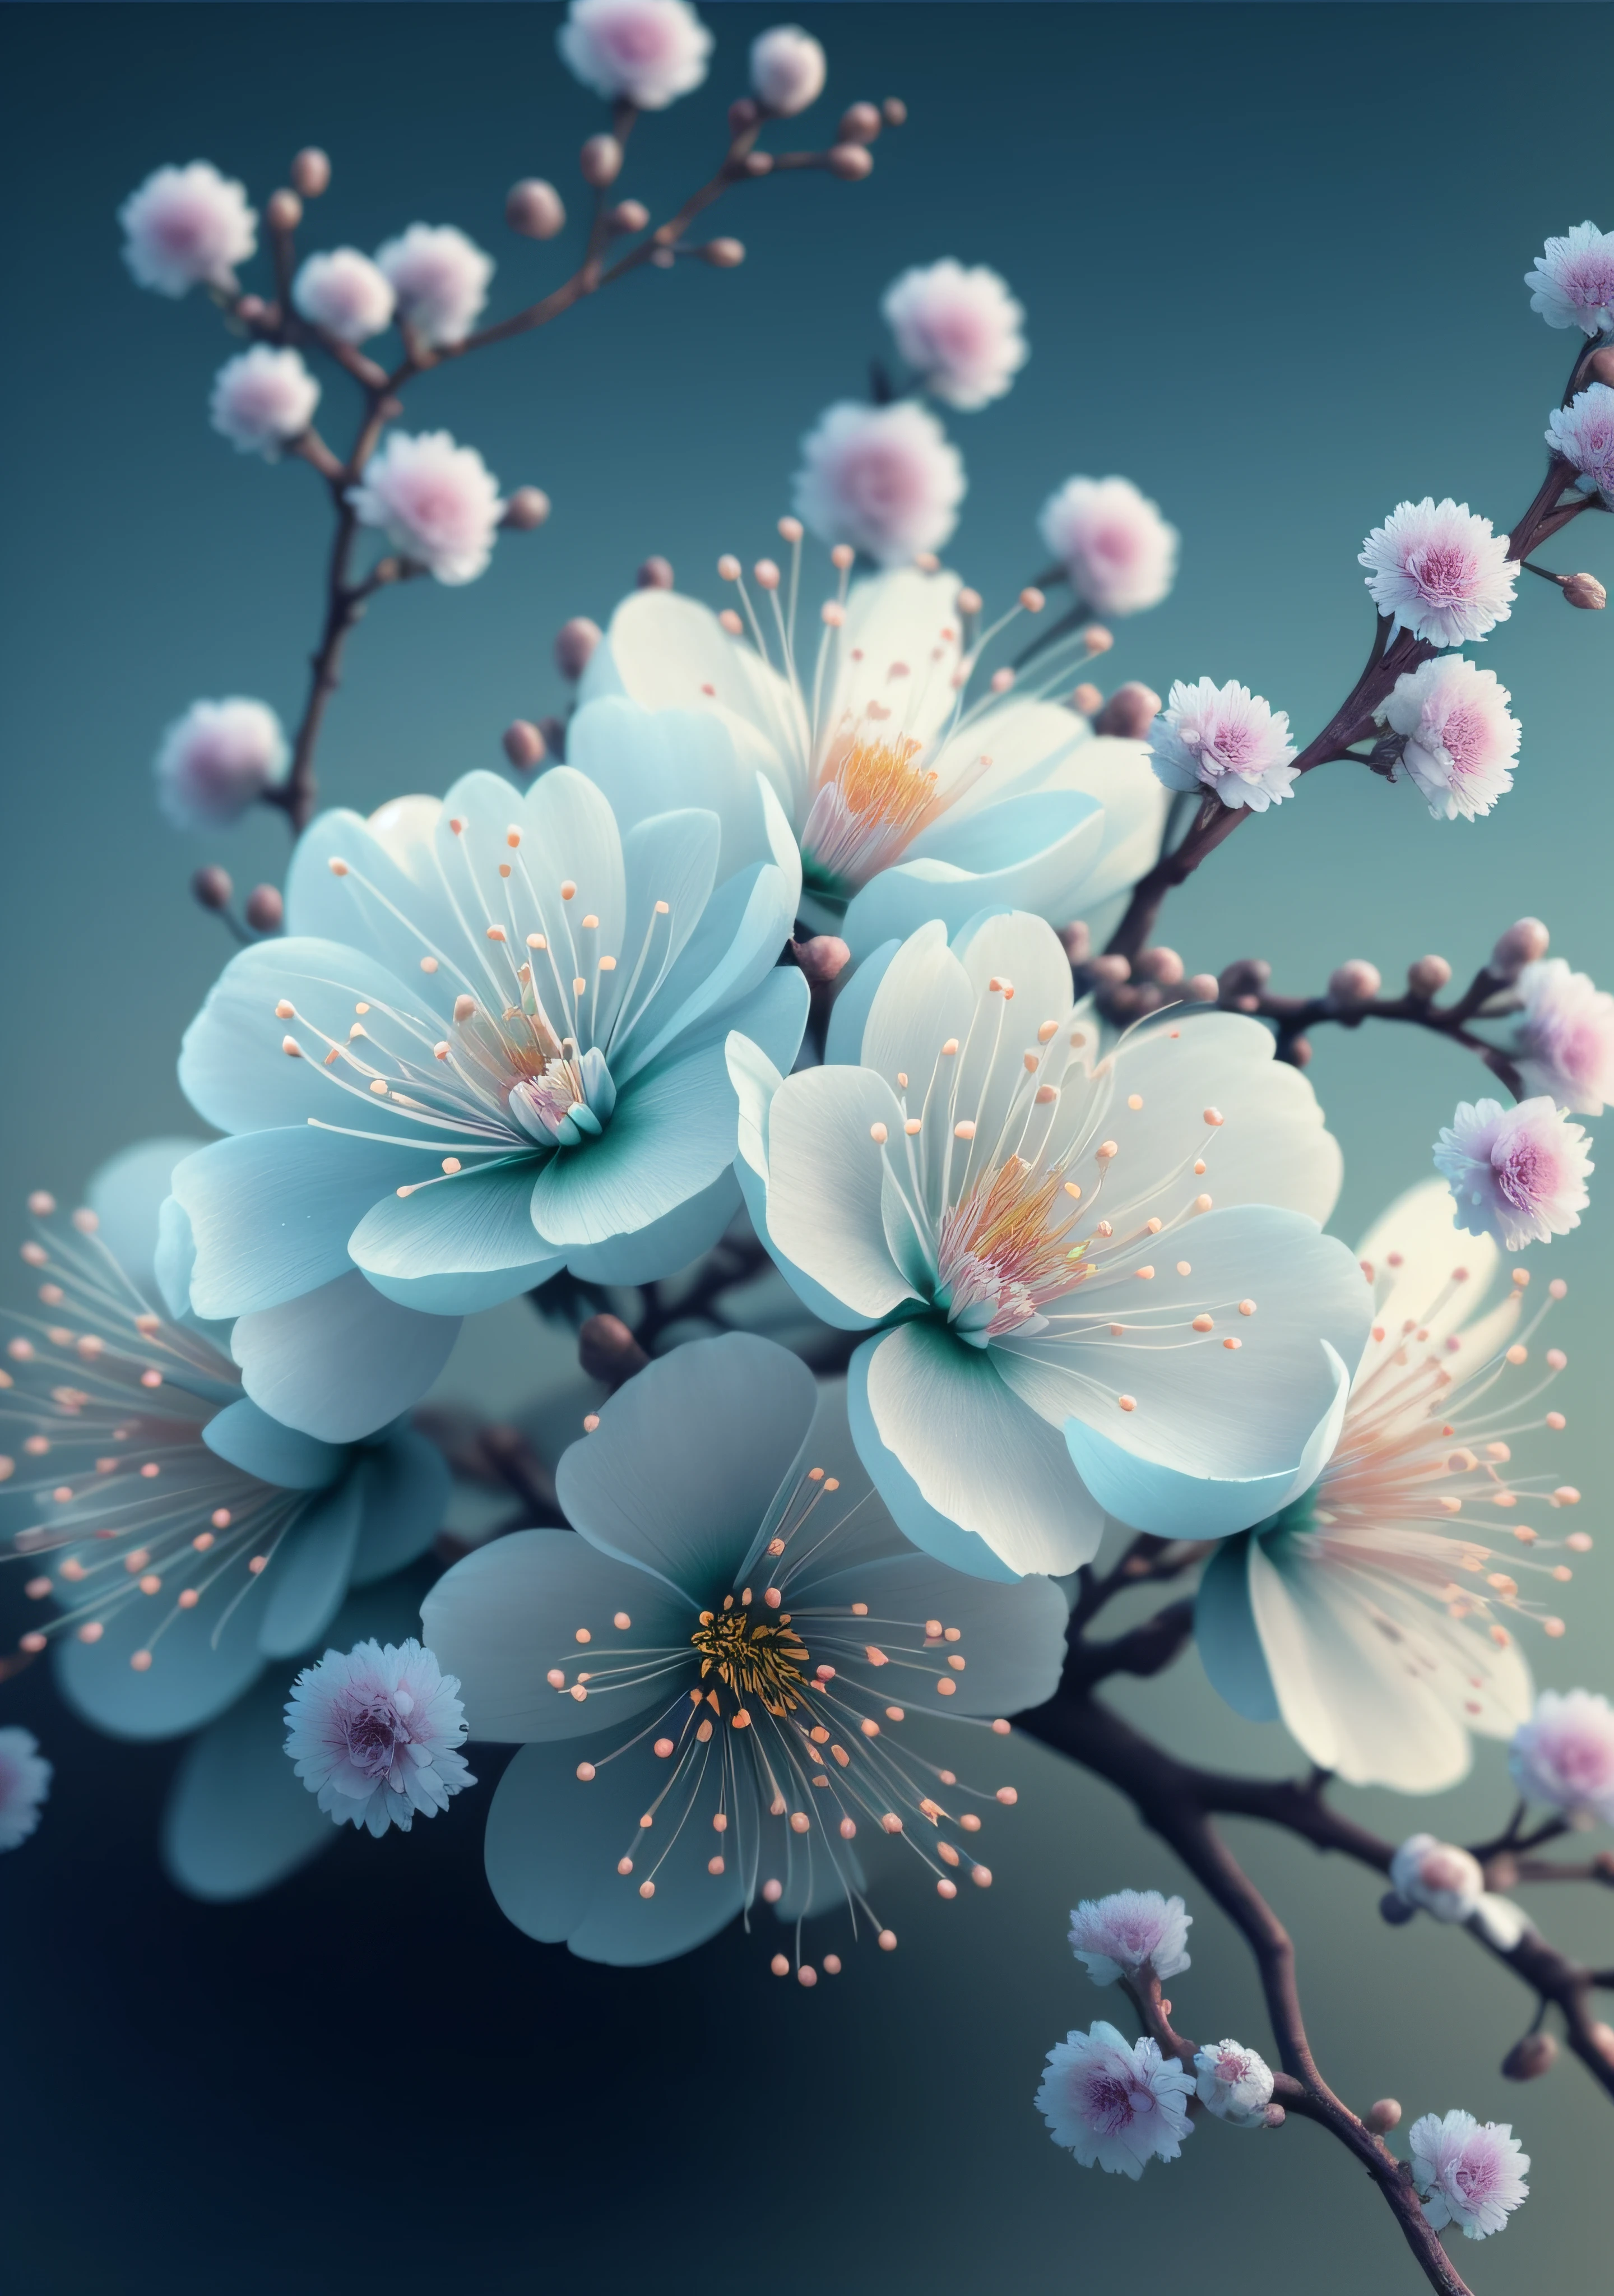 there is a close up of a bunch of flowers on a branch, paul barson, flower blossoms, beautiful digital artwork, beautiful digital art, flowers and blossoms, surreal waiizi flowers, beautiful flowers, blooming flowers, flowers with intricate detail, incredibly beautiful, beautiful art, beautiful composition 3 - d 4 k, gorgeous digital art, sakura flowers